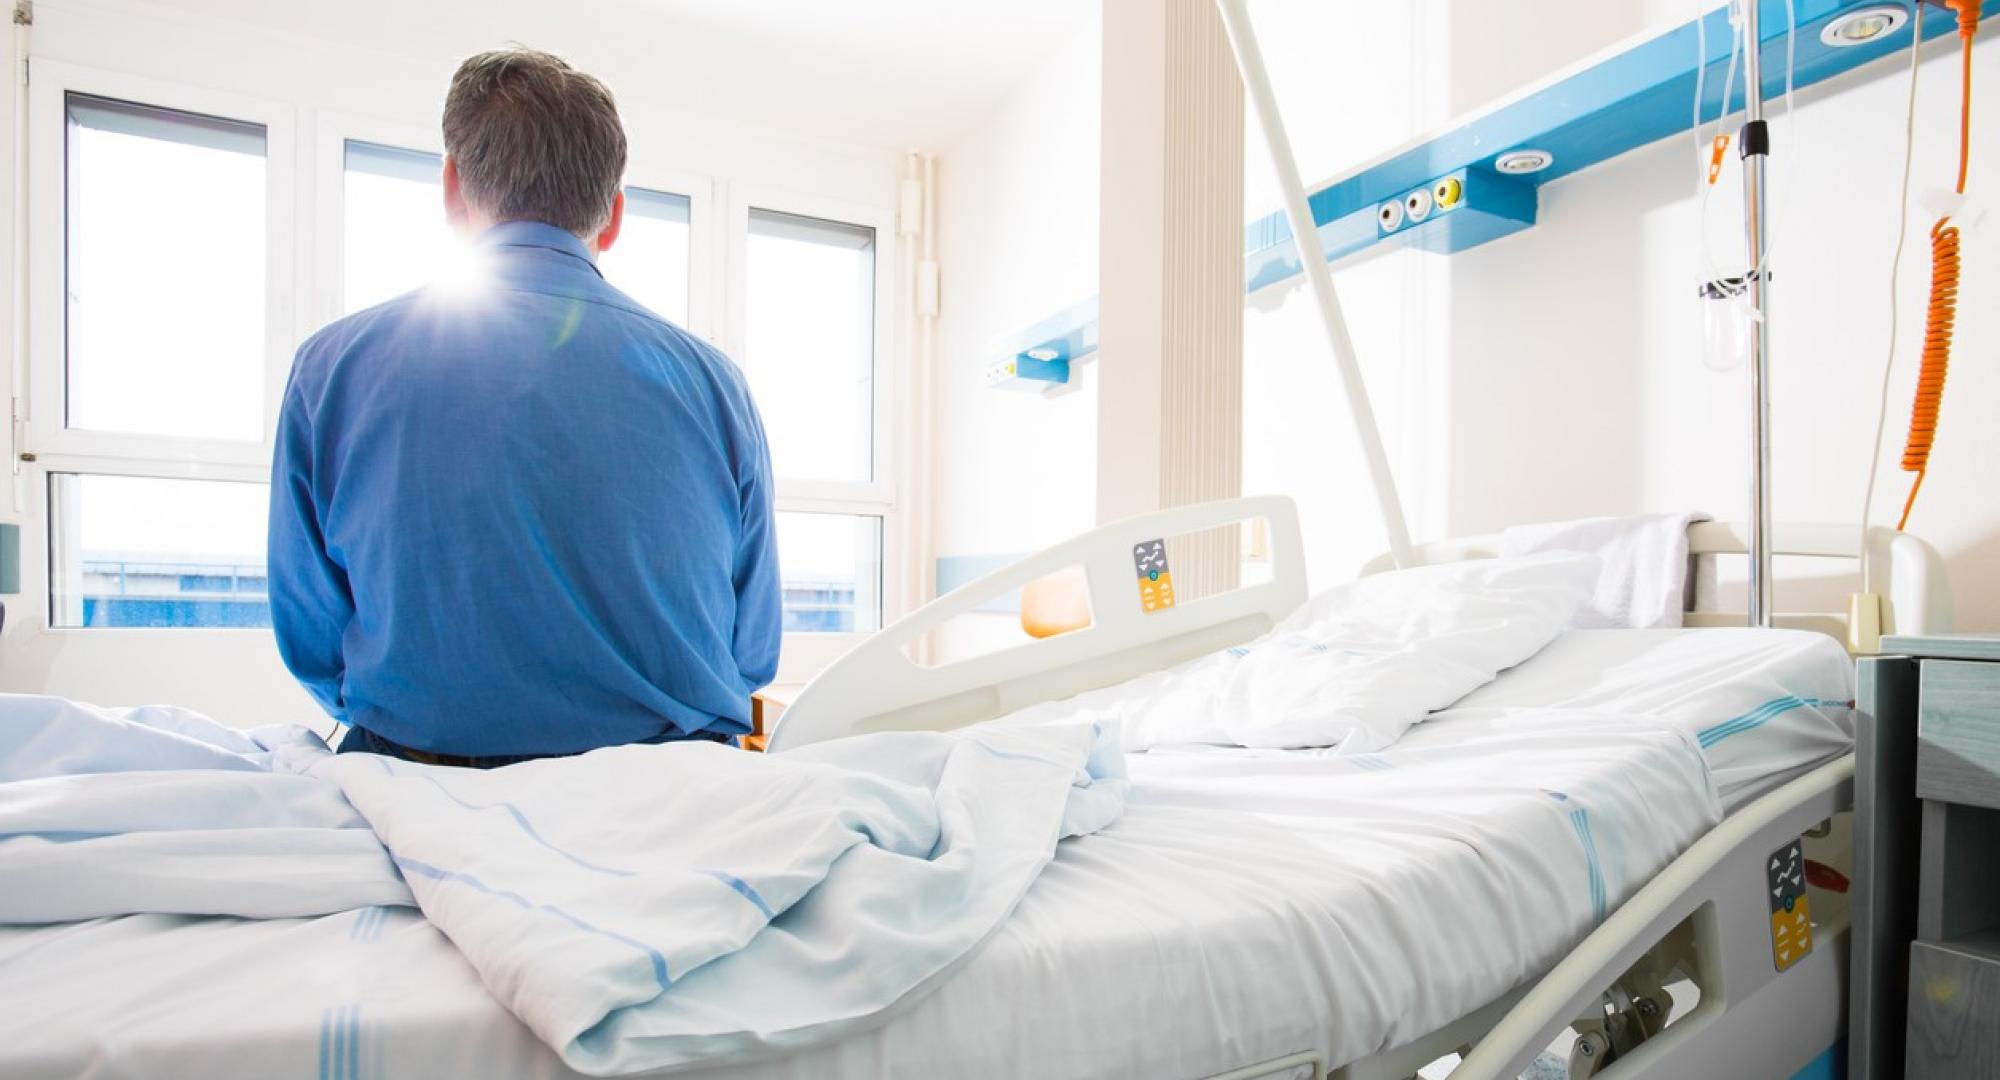 Man sitting on a hospital bed looking out of a window